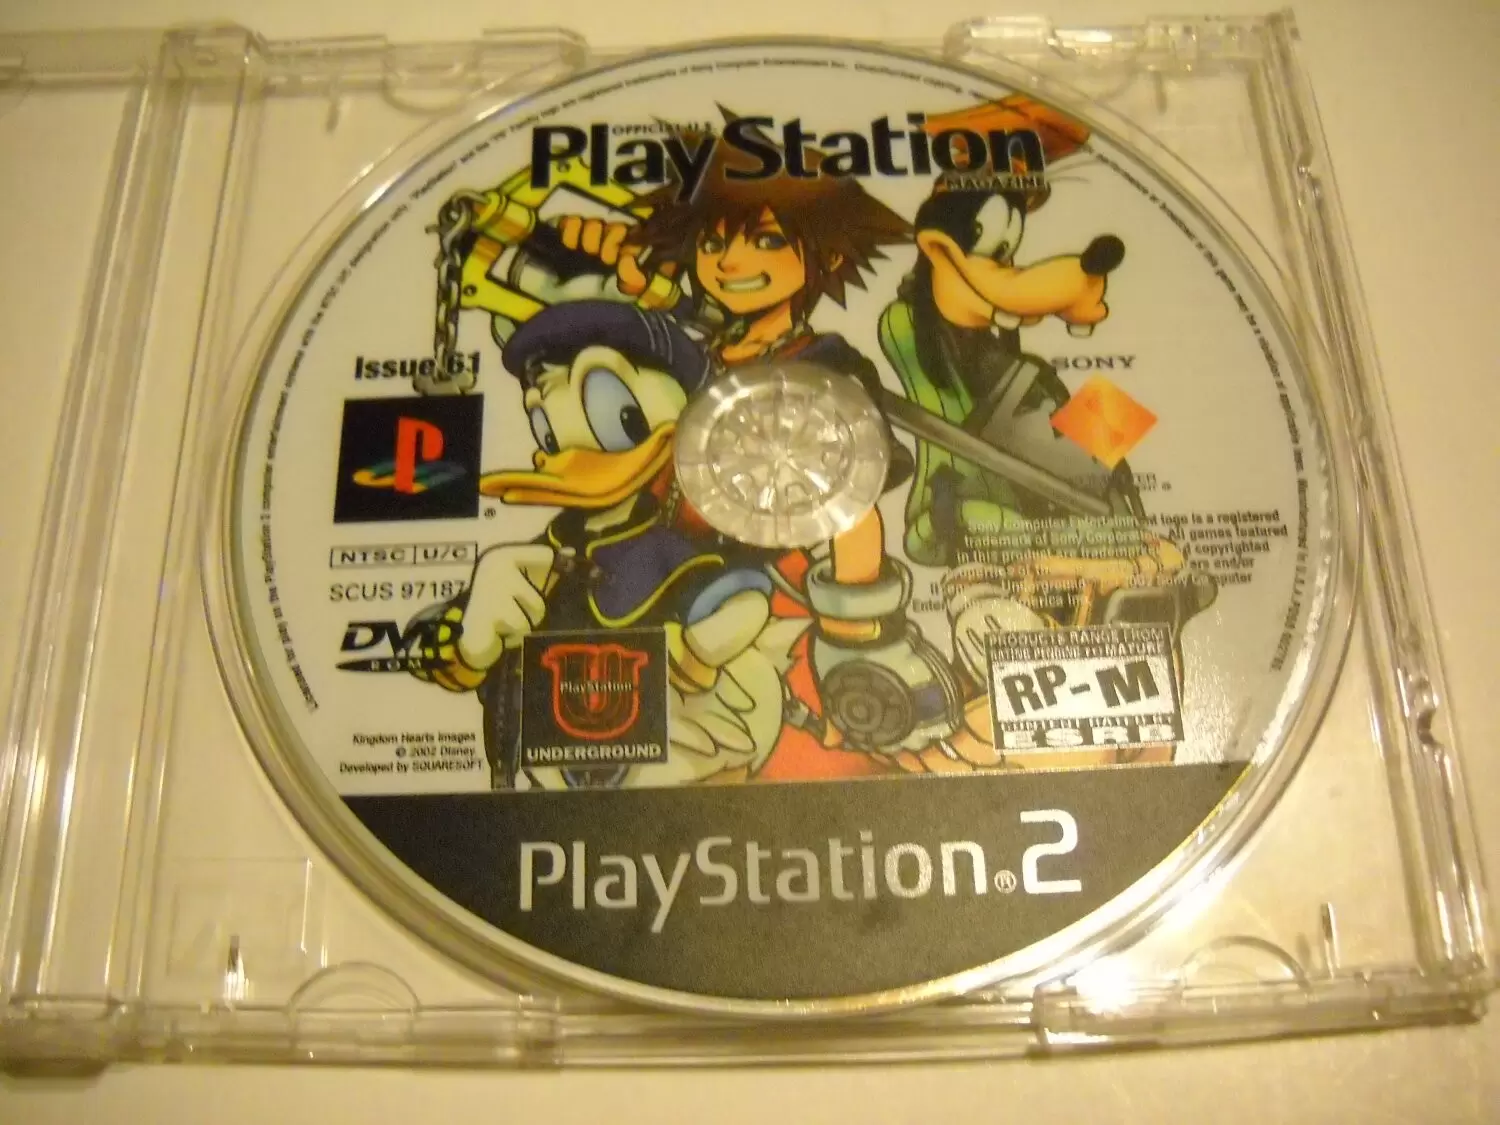 PS2 Games - PS2 Demo Disc Issue 61